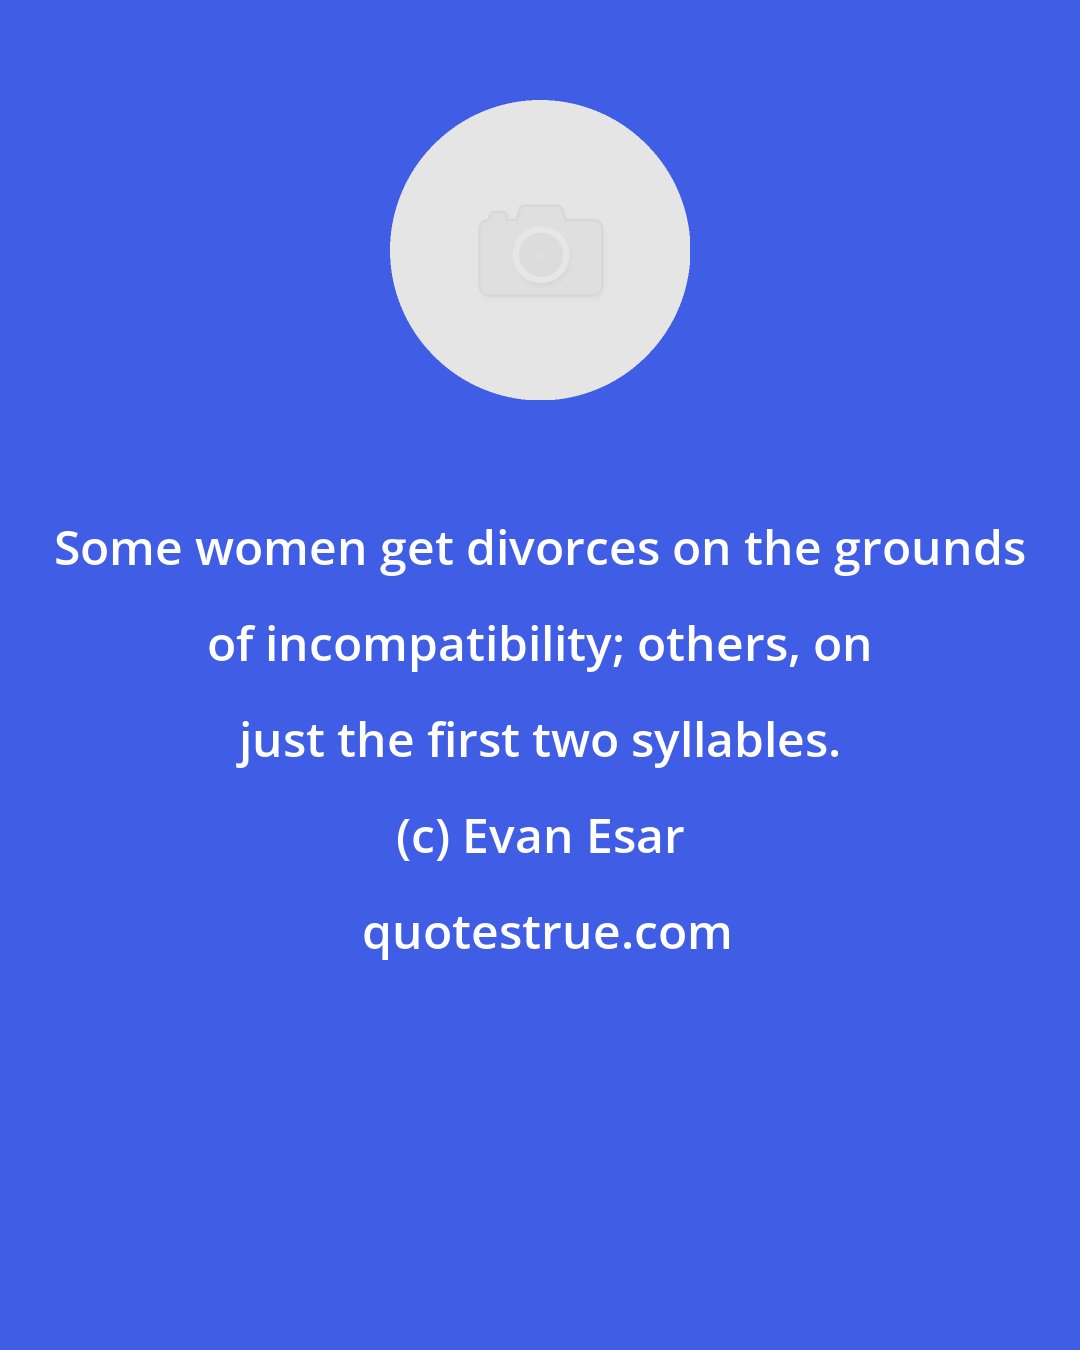 Evan Esar: Some women get divorces on the grounds of incompatibility; others, on just the first two syllables.